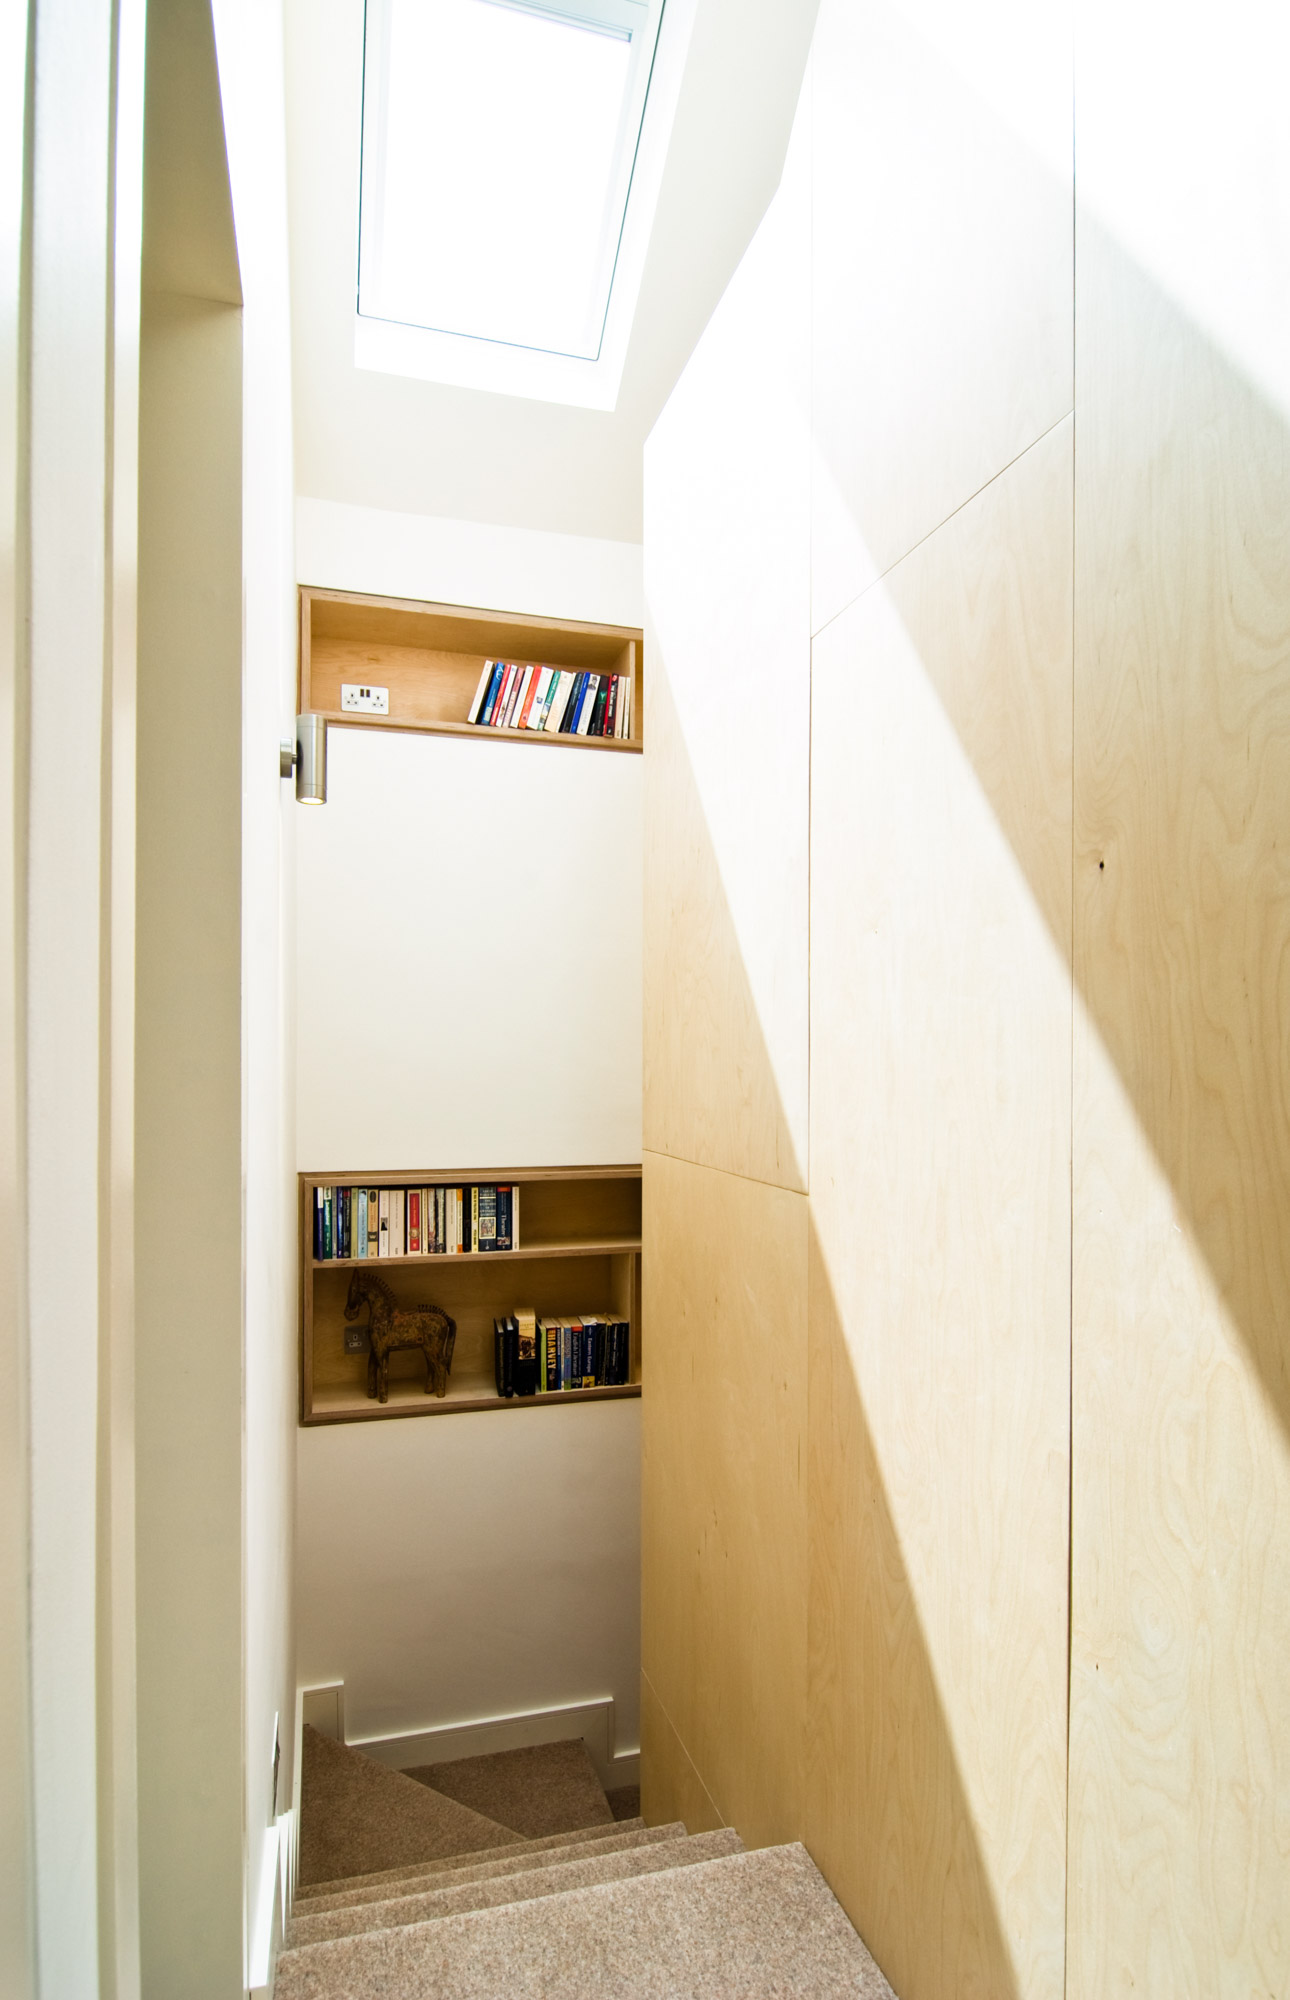 Close up of the plywood shelving by the staircase.